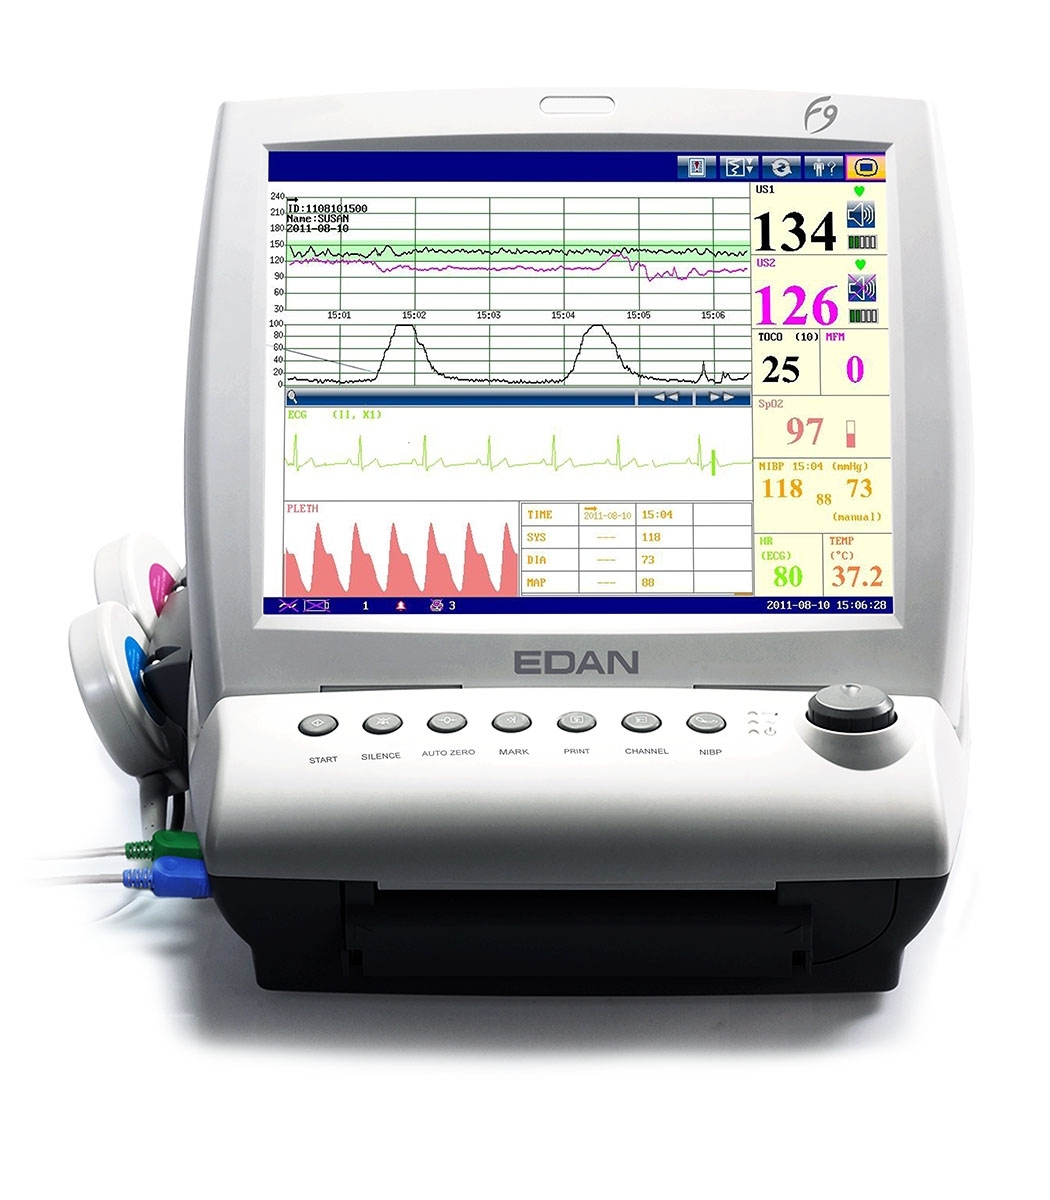 Edan Monitor # F9Express - Edan F9 Express Fetal/Maternal Monitor with DECG/IUP and Touch Screen, Each